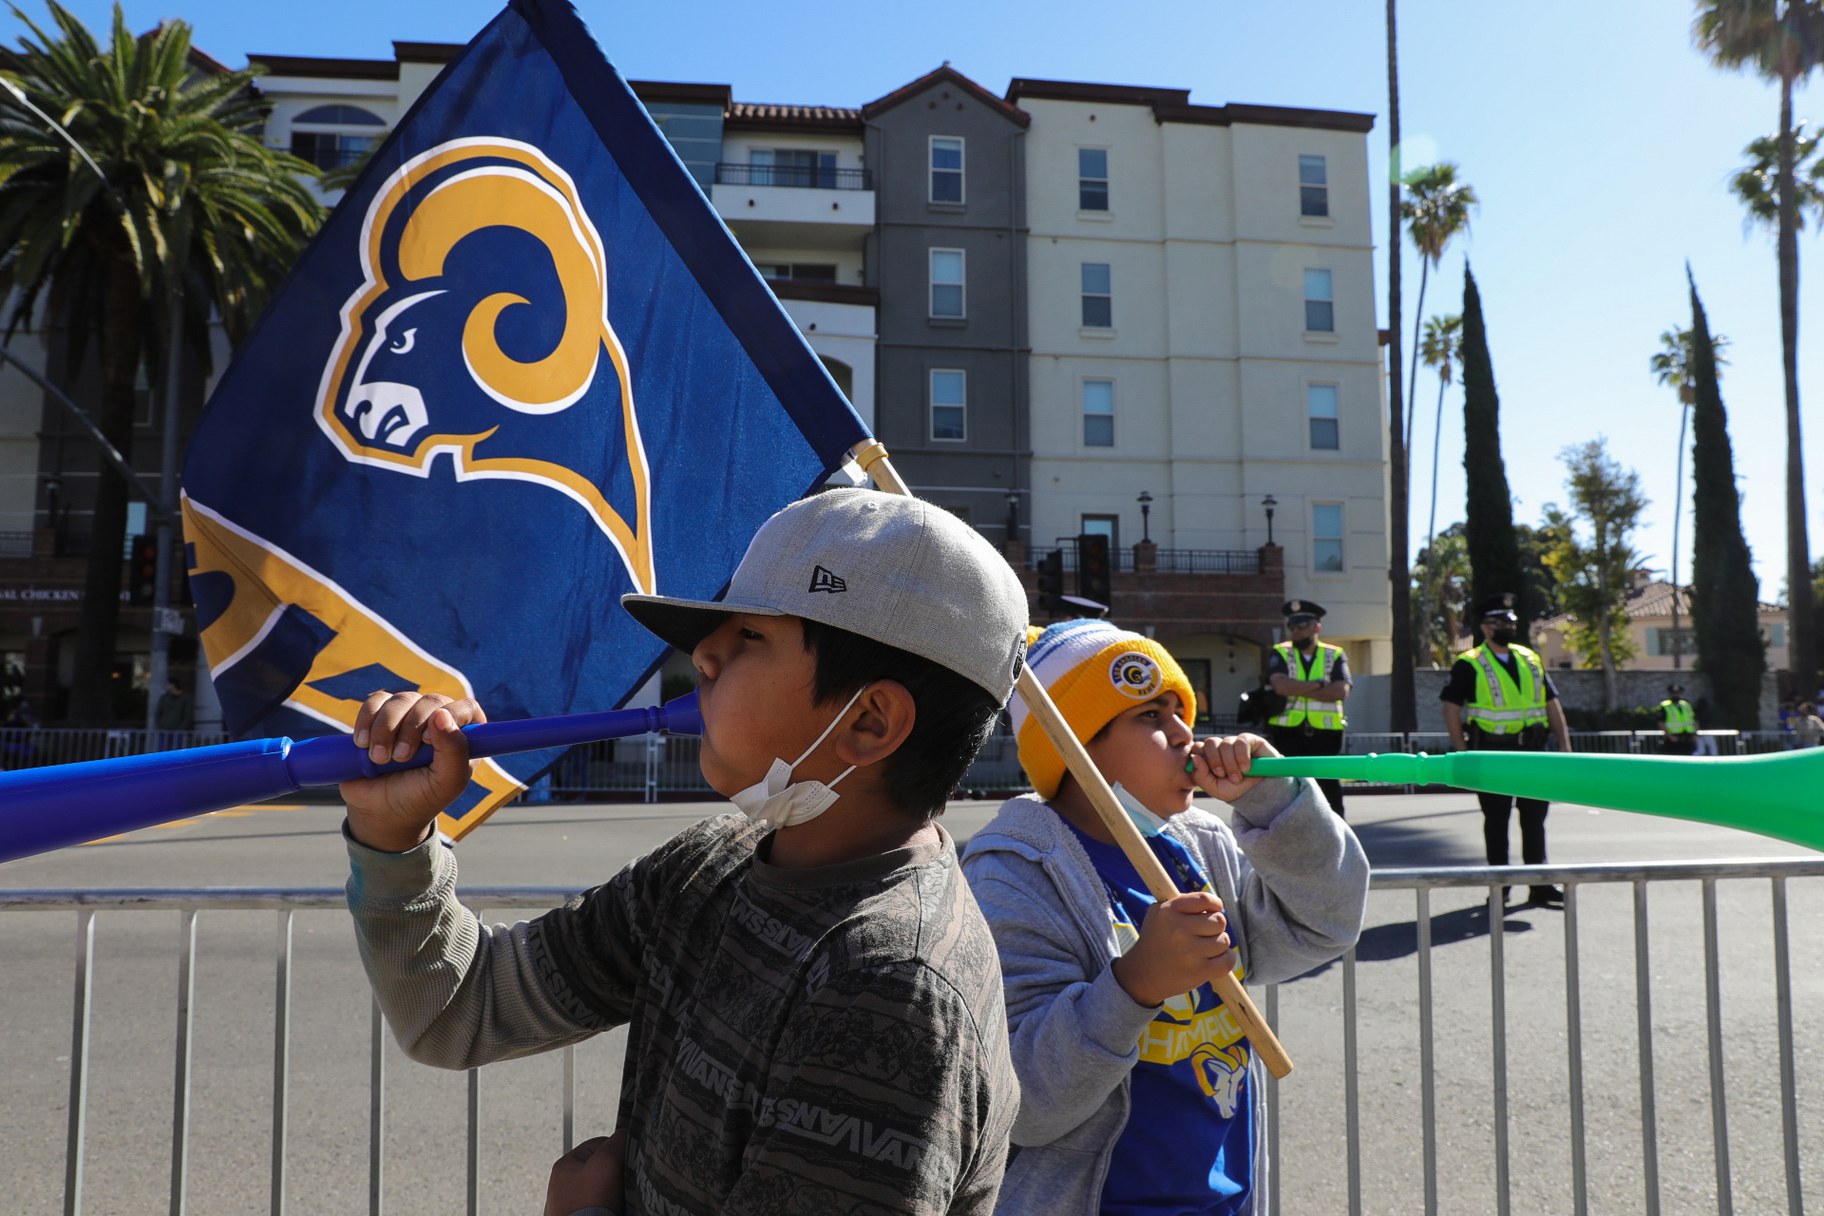 L.A. Rams Super Bowl championship parade and rally 